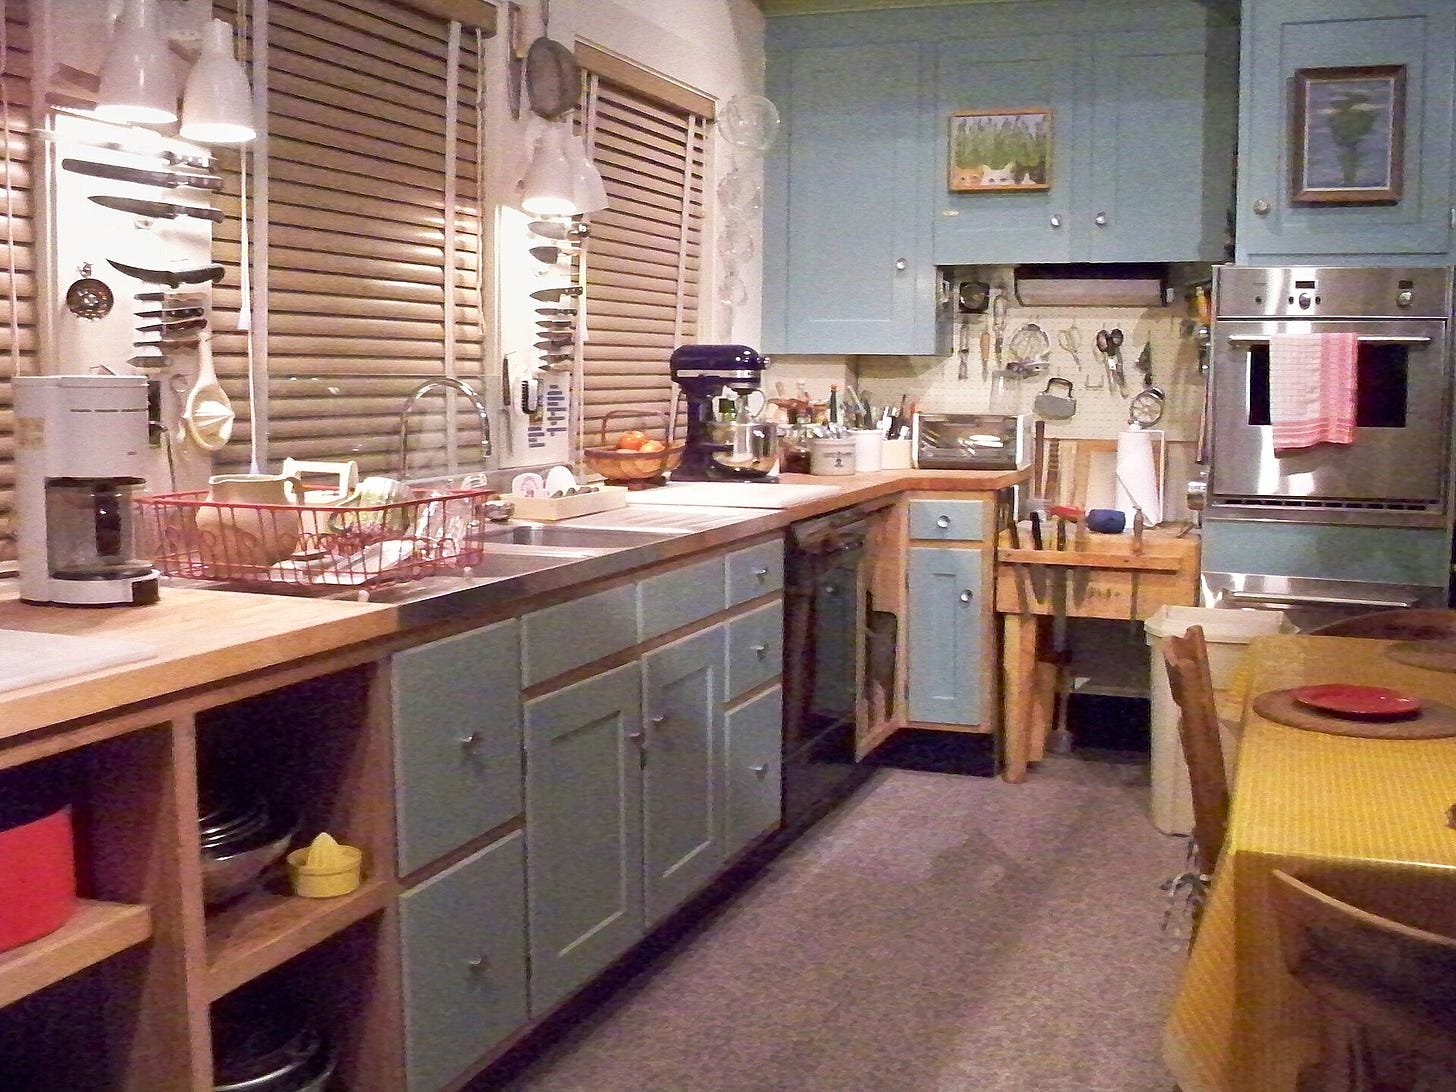 Julia Child's kitchen exhibit at the National Museum of American History. Blue cabinets, sink, mixer, kitchen tools.